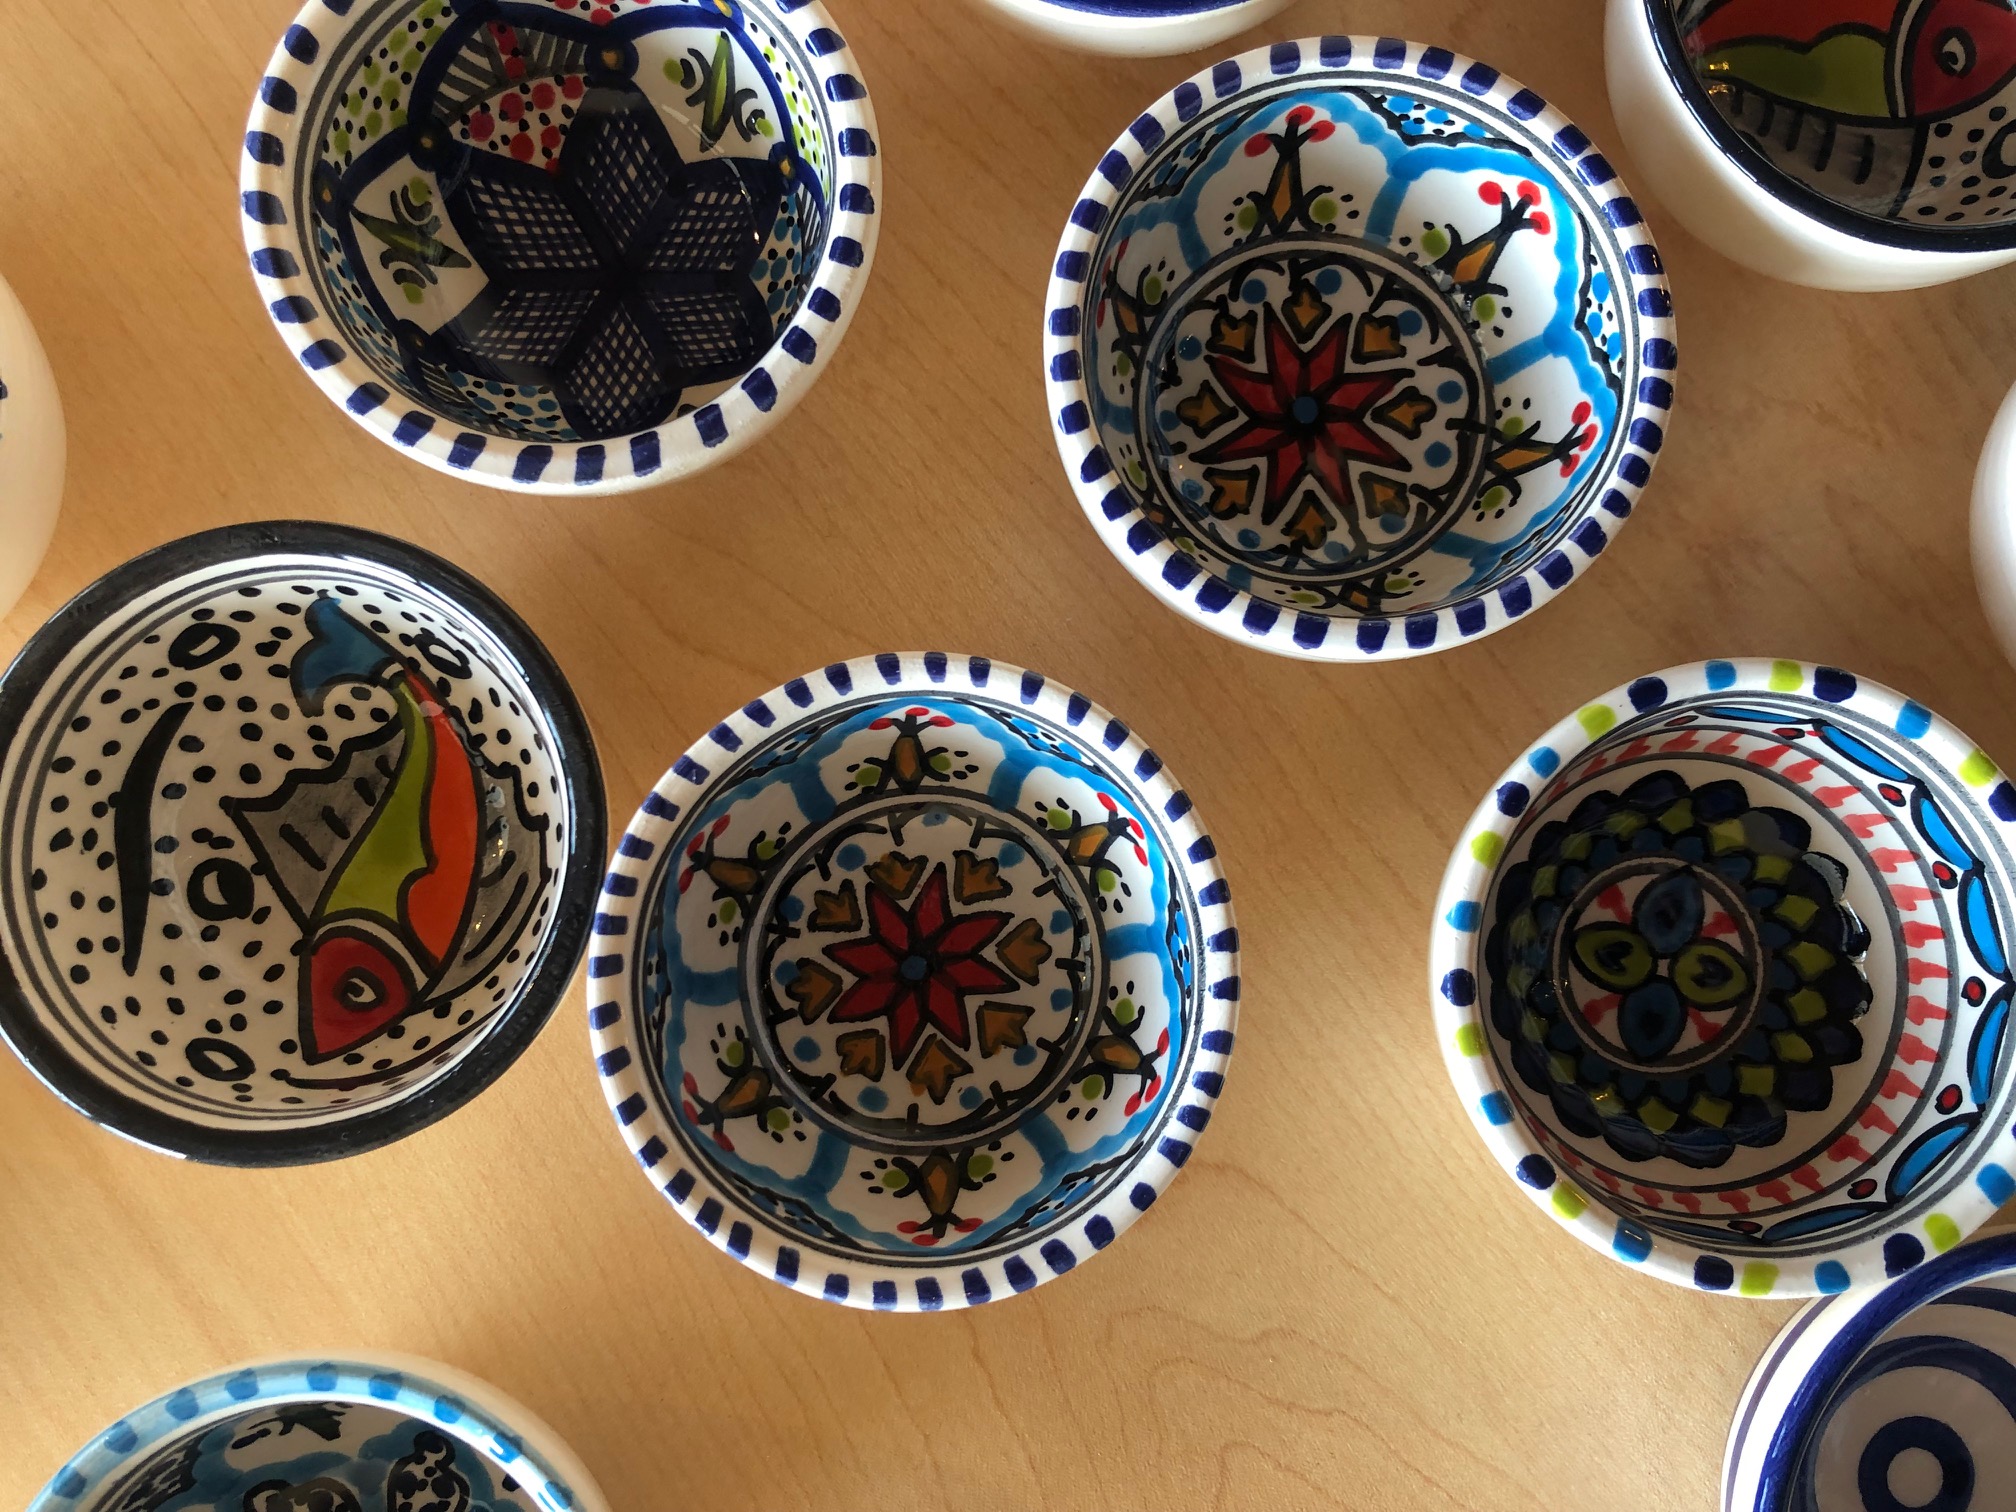 An overhead photo shows the inside of hand-painted bowls. Photo by Alyssa Buckley.